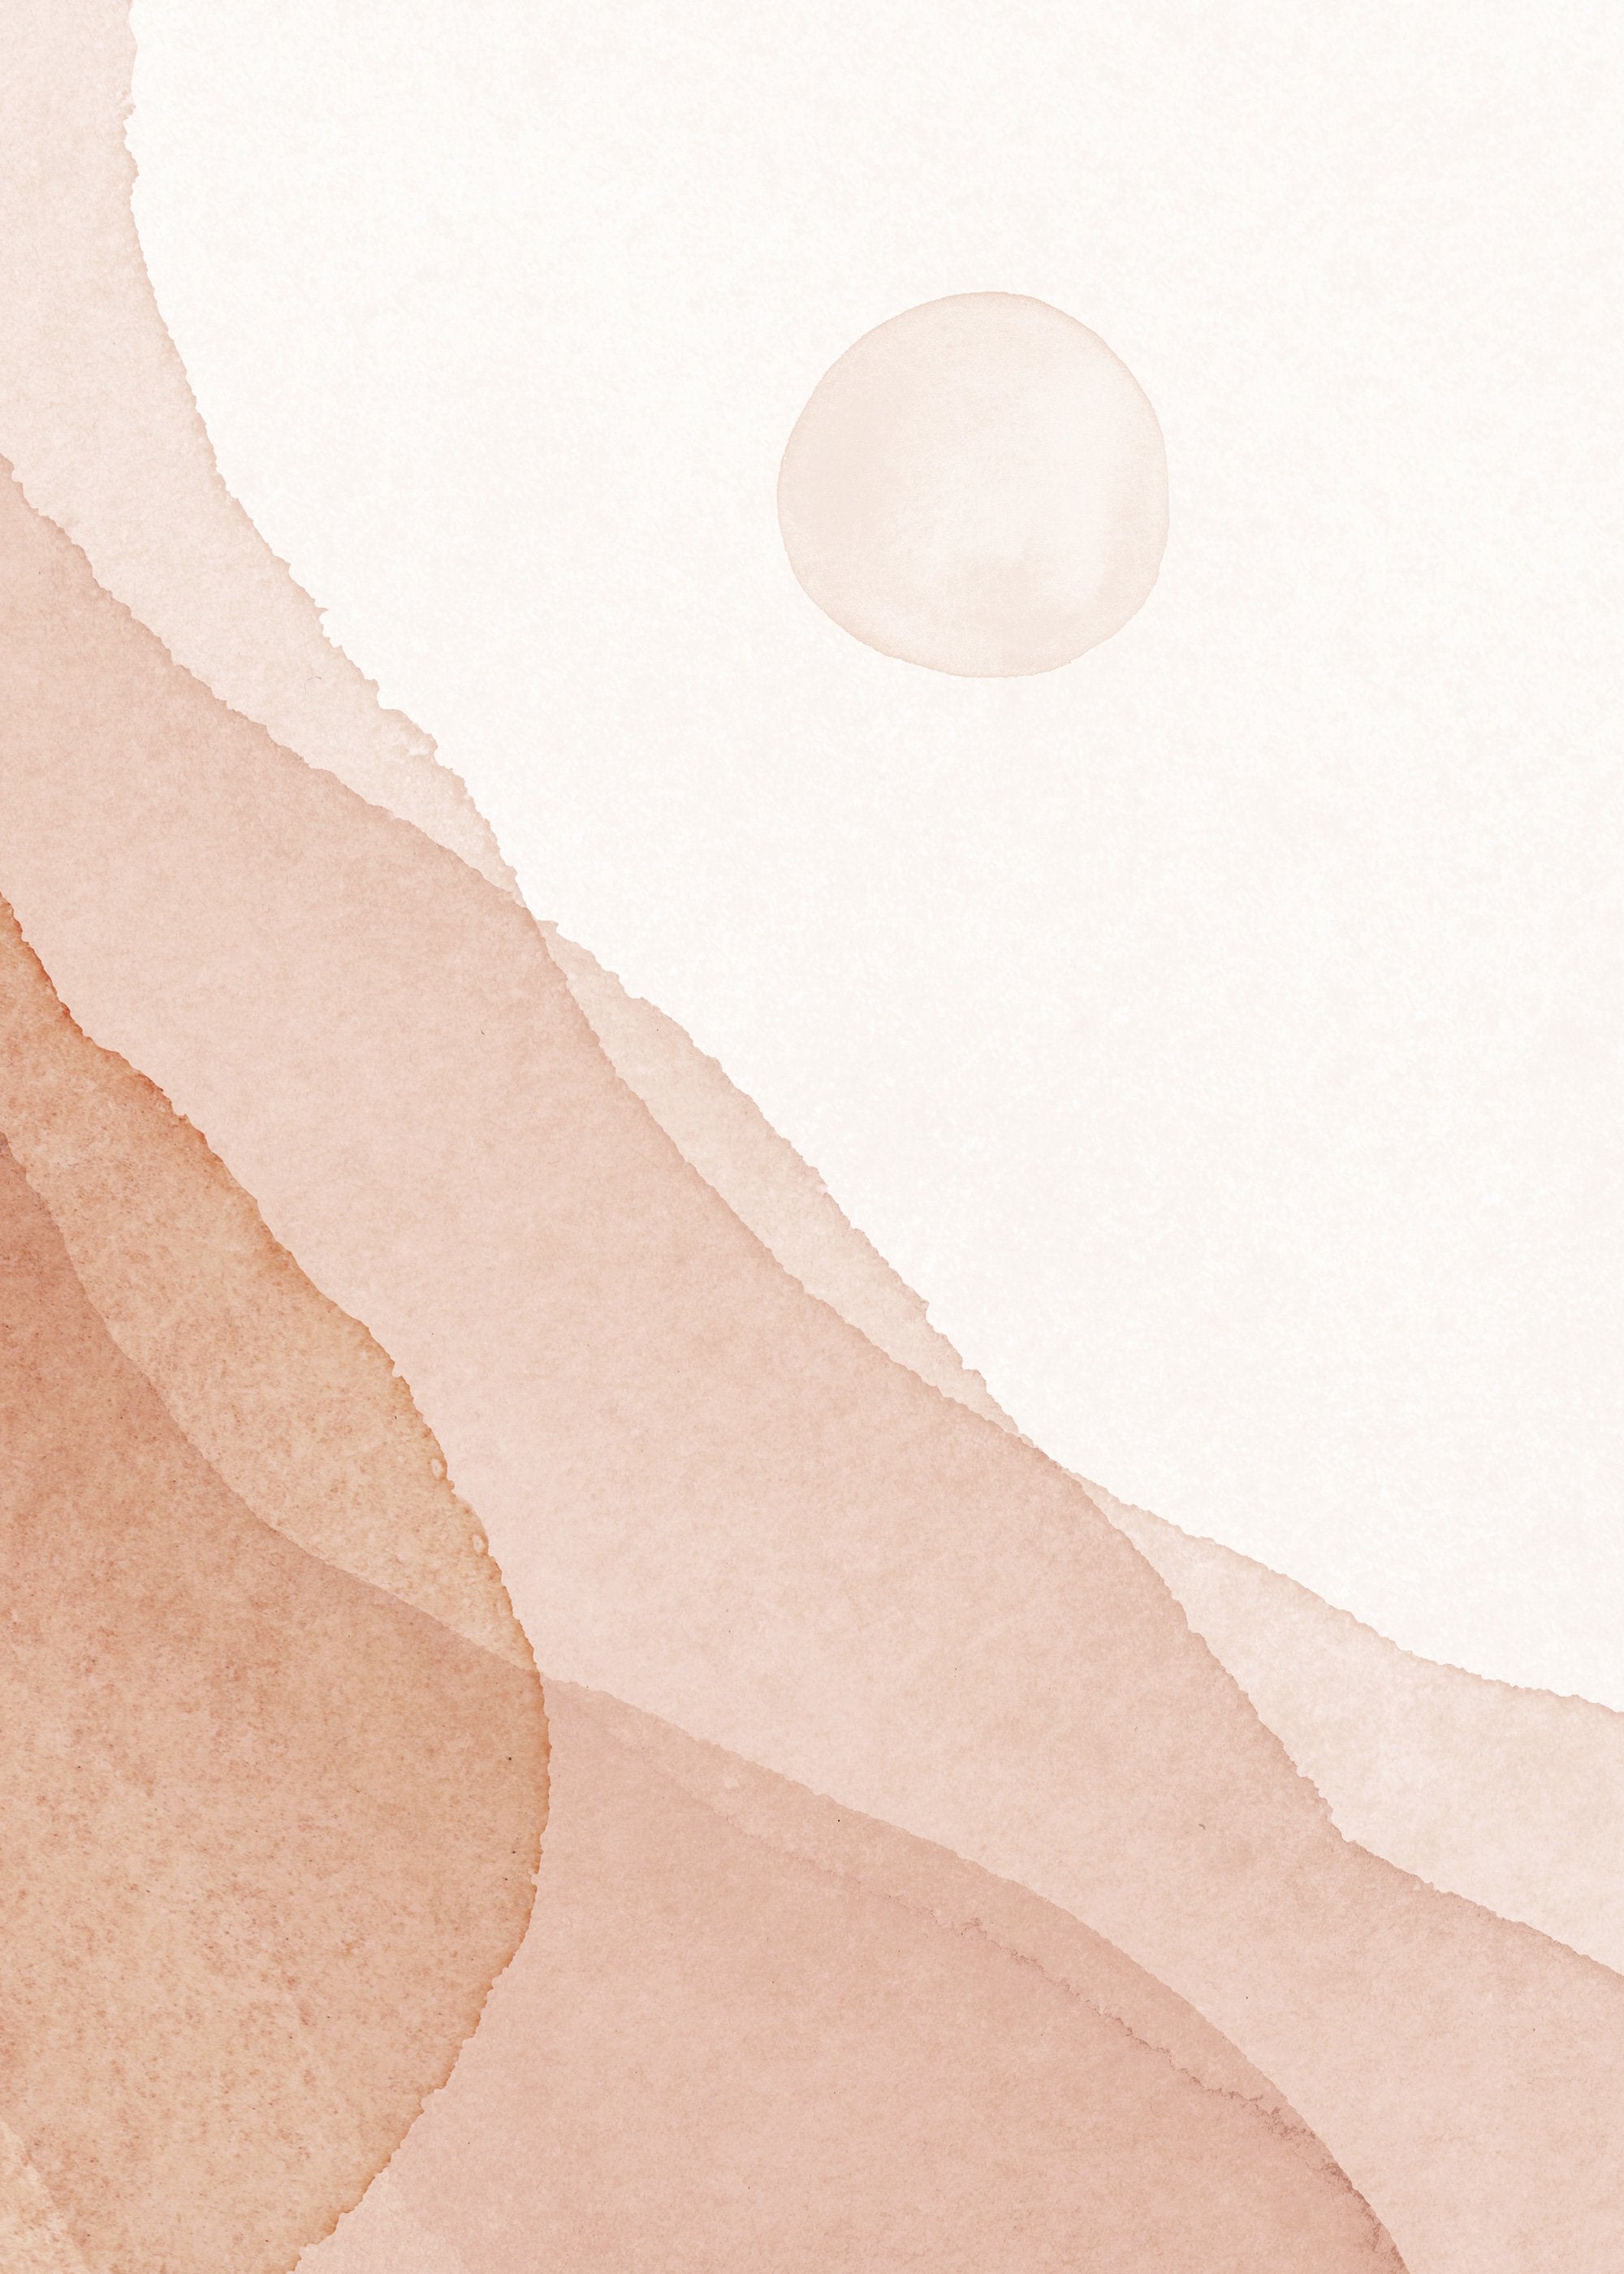 Dusty Blush Abstract Landscape Art Print No.7 - Feathers and Stone